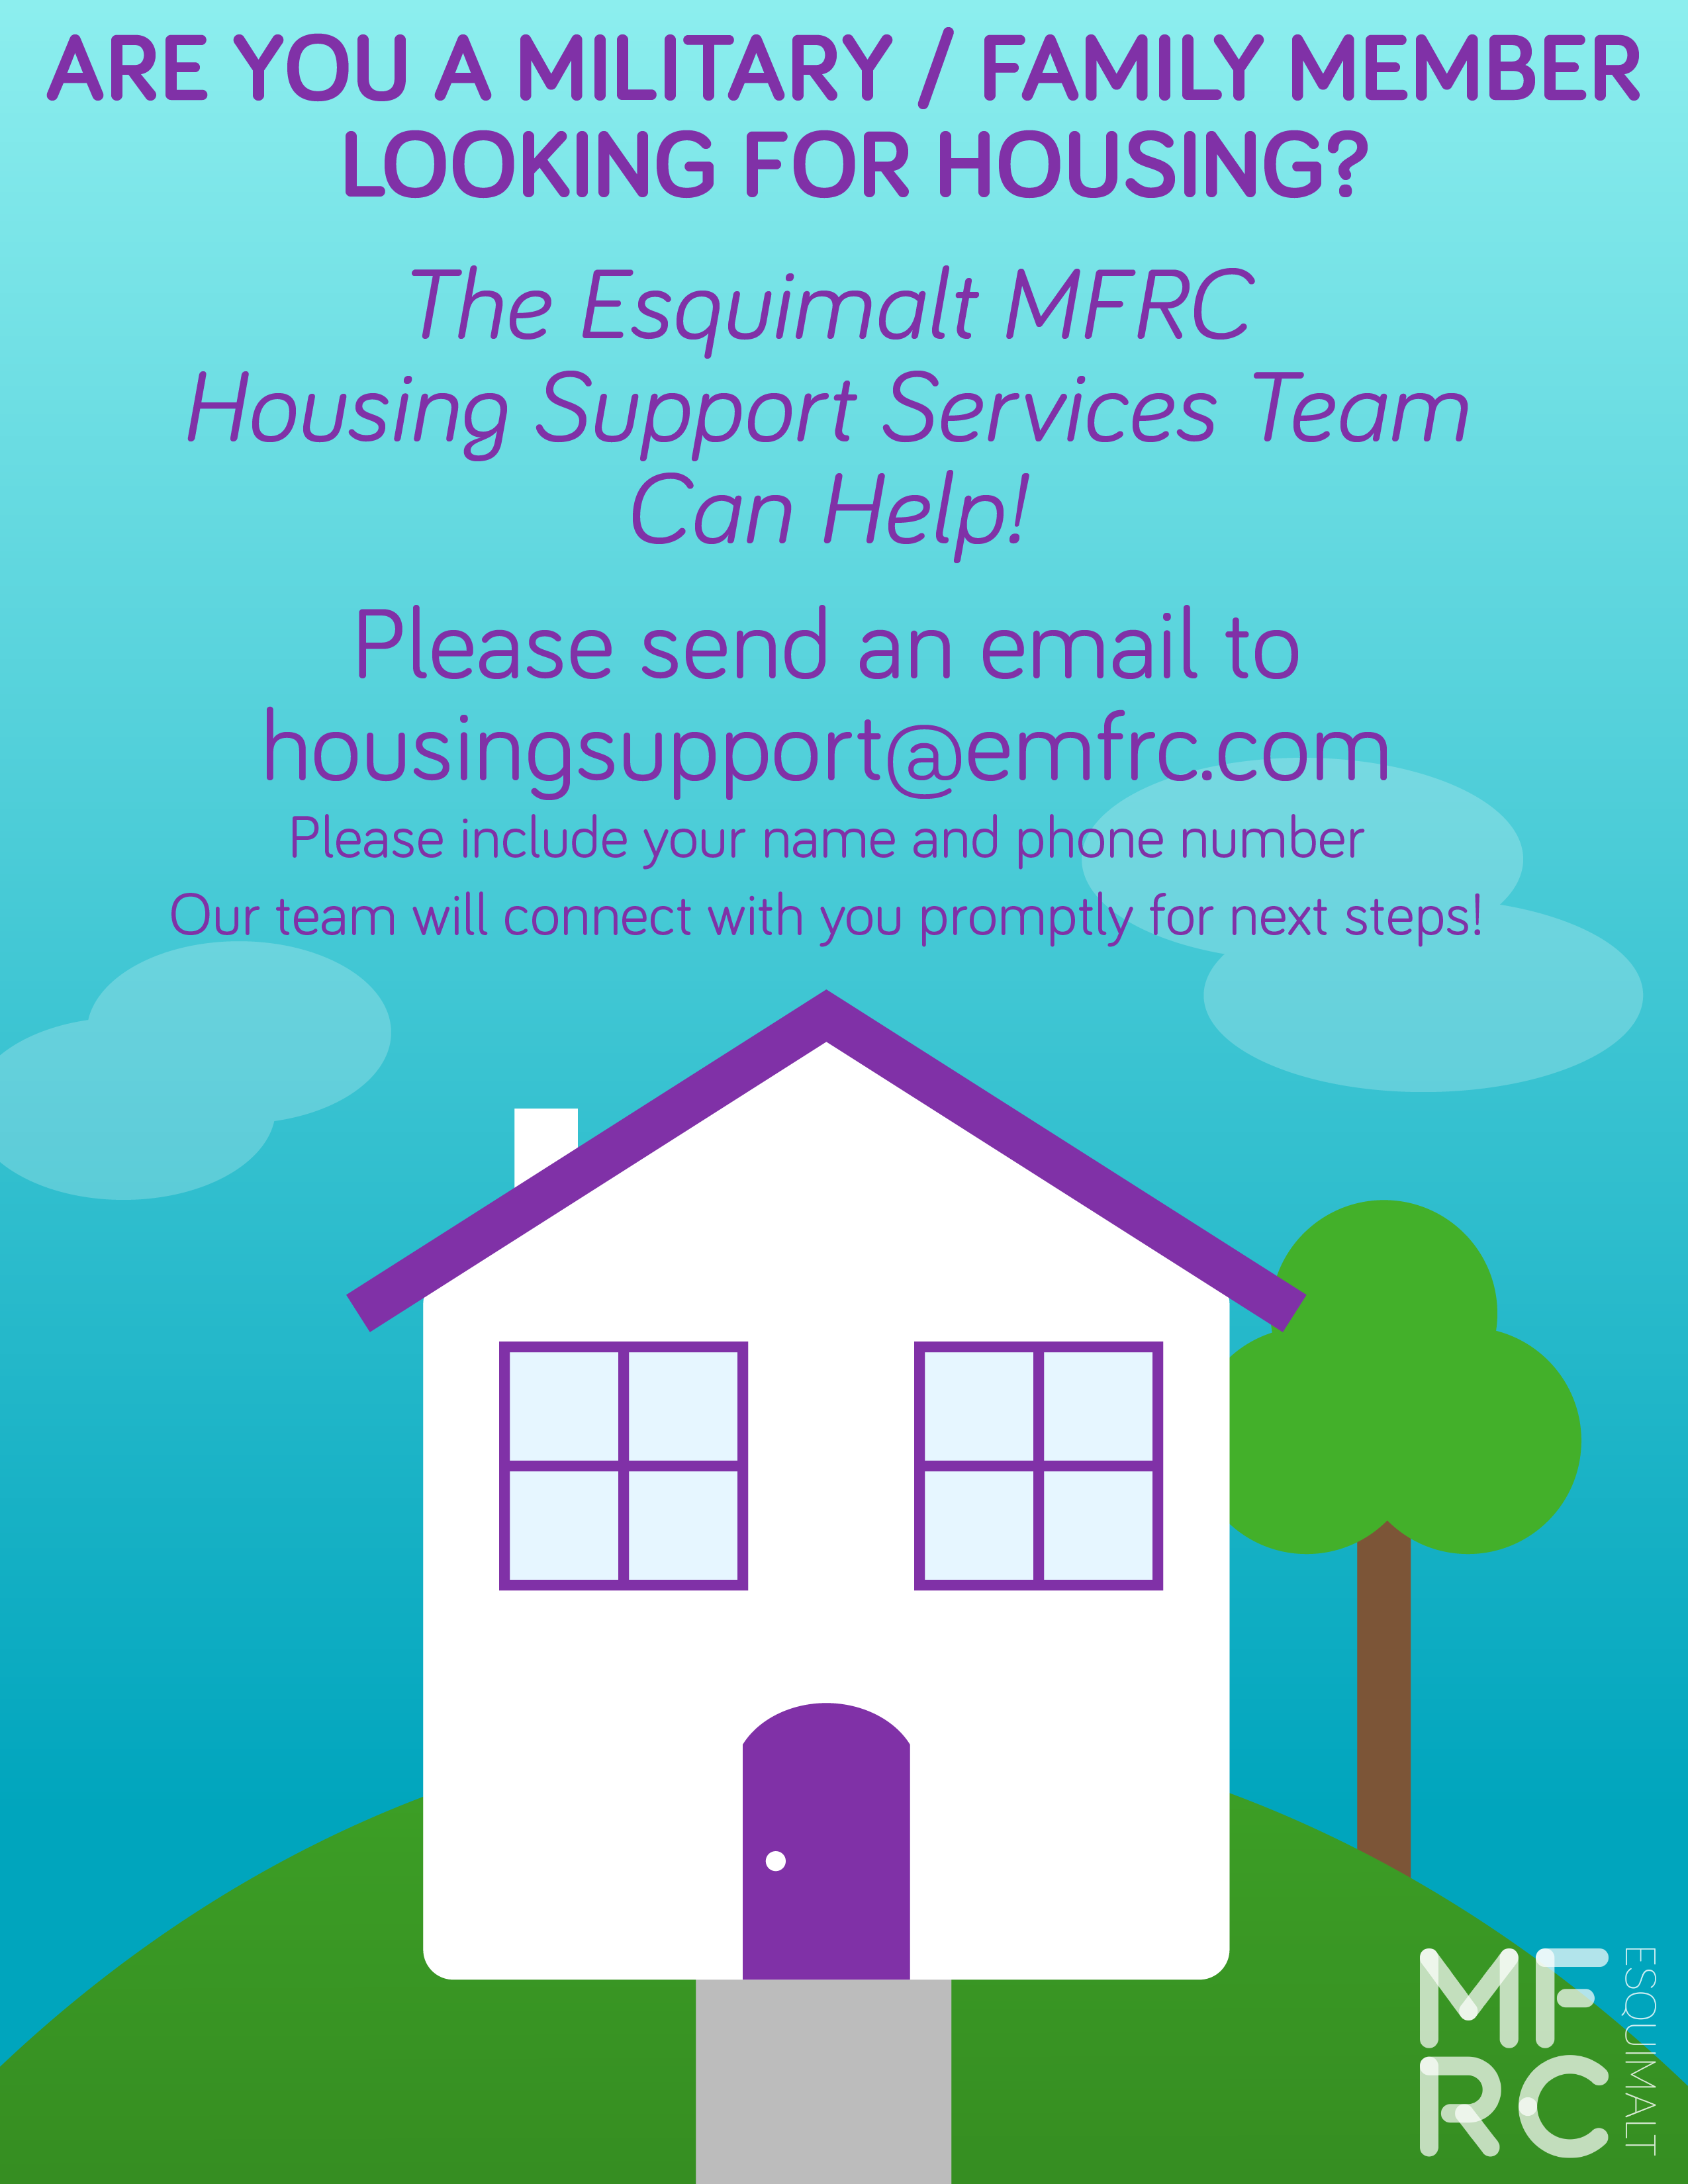 Are you Military / Family Member looking for housing? The Esquimalt MFRC Housing Support Services Team Can Help! Please send an email to housingsupport@emfrc.com